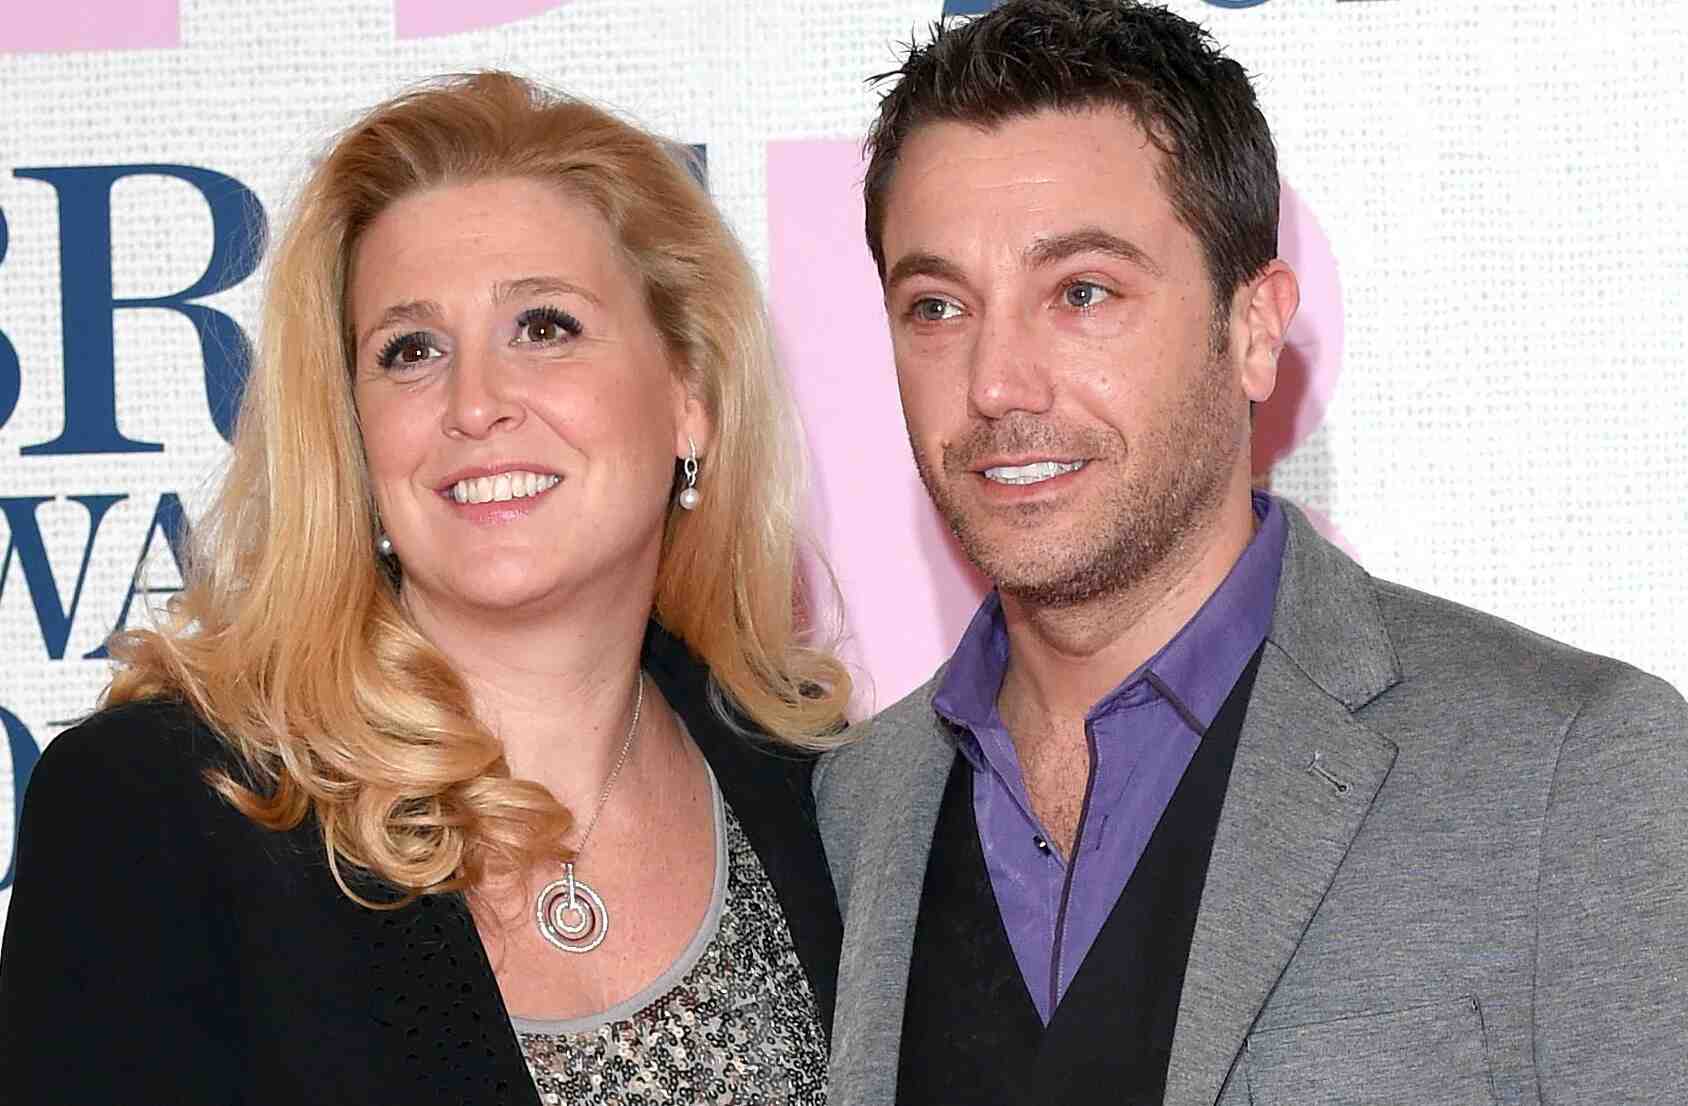 Image of Gino D'Acampo with his wife Jessica Stellina Morrison